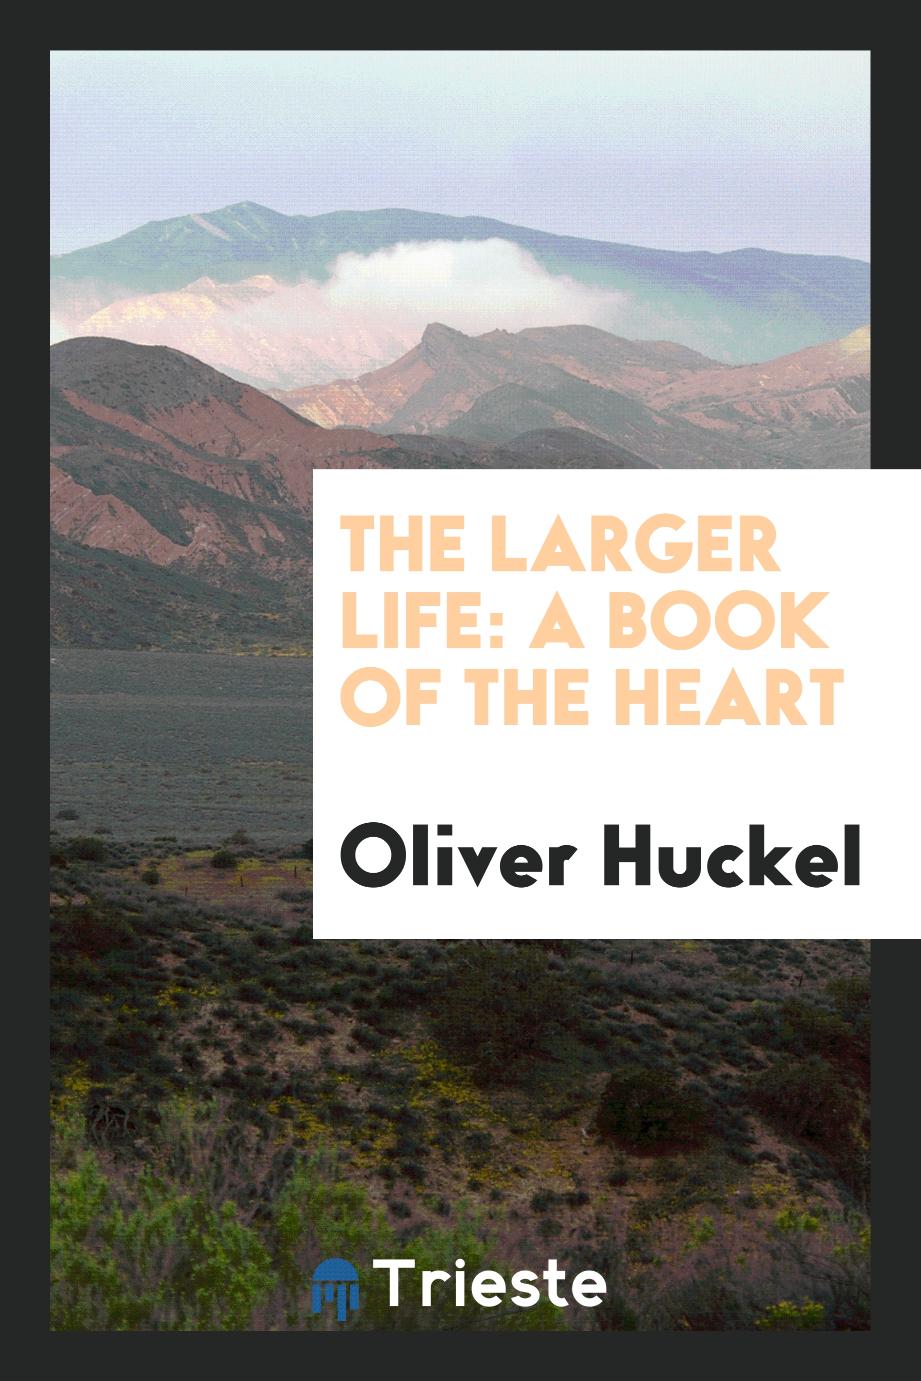 The Larger Life: A Book of the Heart